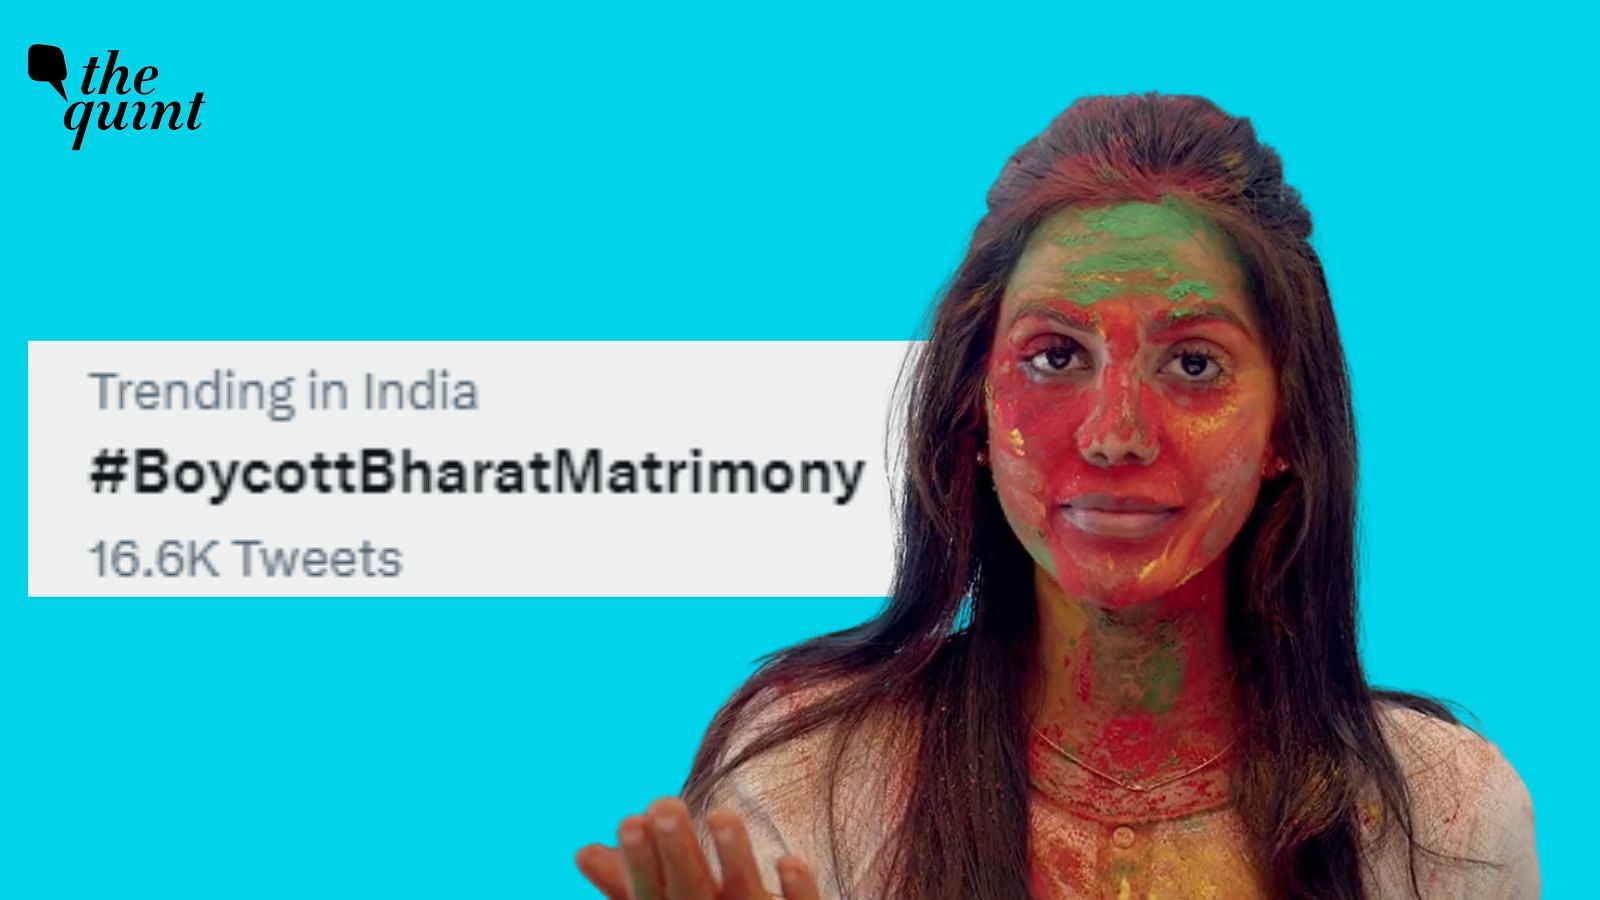 <div class="paragraphs"><p>Online matrimony service Bharat Matrimony is the latest in the long list of brands that have recently come under fire for alleged "anti-Hindu" campaigns.</p></div>